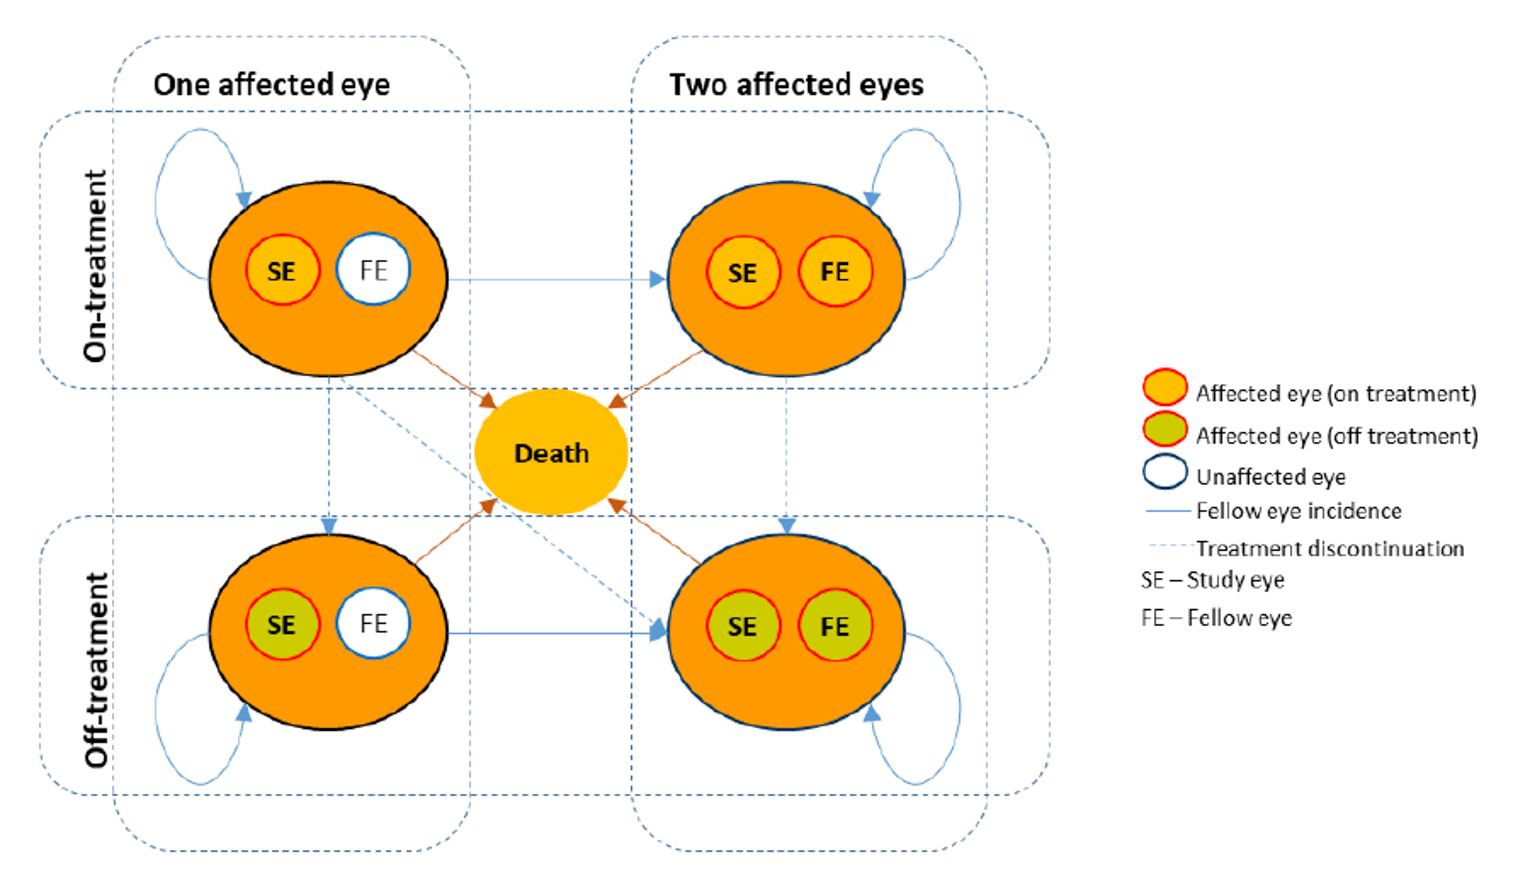 A schematic detailing how patients move between on and off treatment states for unilateral or bilateral DME based on treatment discontinuation. A patient with 1 eye on treatment (the study eye) can continue being treated in 1 affected eye, develop bilateral disease (in the fellow eye) and have both eyes treated, go off treatment with 1 affected eye, or go off treatment with 2 affected eyes. A patient with 2 affected eyes on treatment can continue being treated for both eyes, or go off treatment for both eyes. A patient with 1 affected eye off treatment can continue being off-treatment with 1 affected eye, or develop bilateral disease and be off treatment with 2 affected eyes. A patient off treatment with 2 affected eyes will continue being off treatment with 2 affected eyes. All patients were at risk of death from any other state, regardless of number of eyes affected or treatment status.